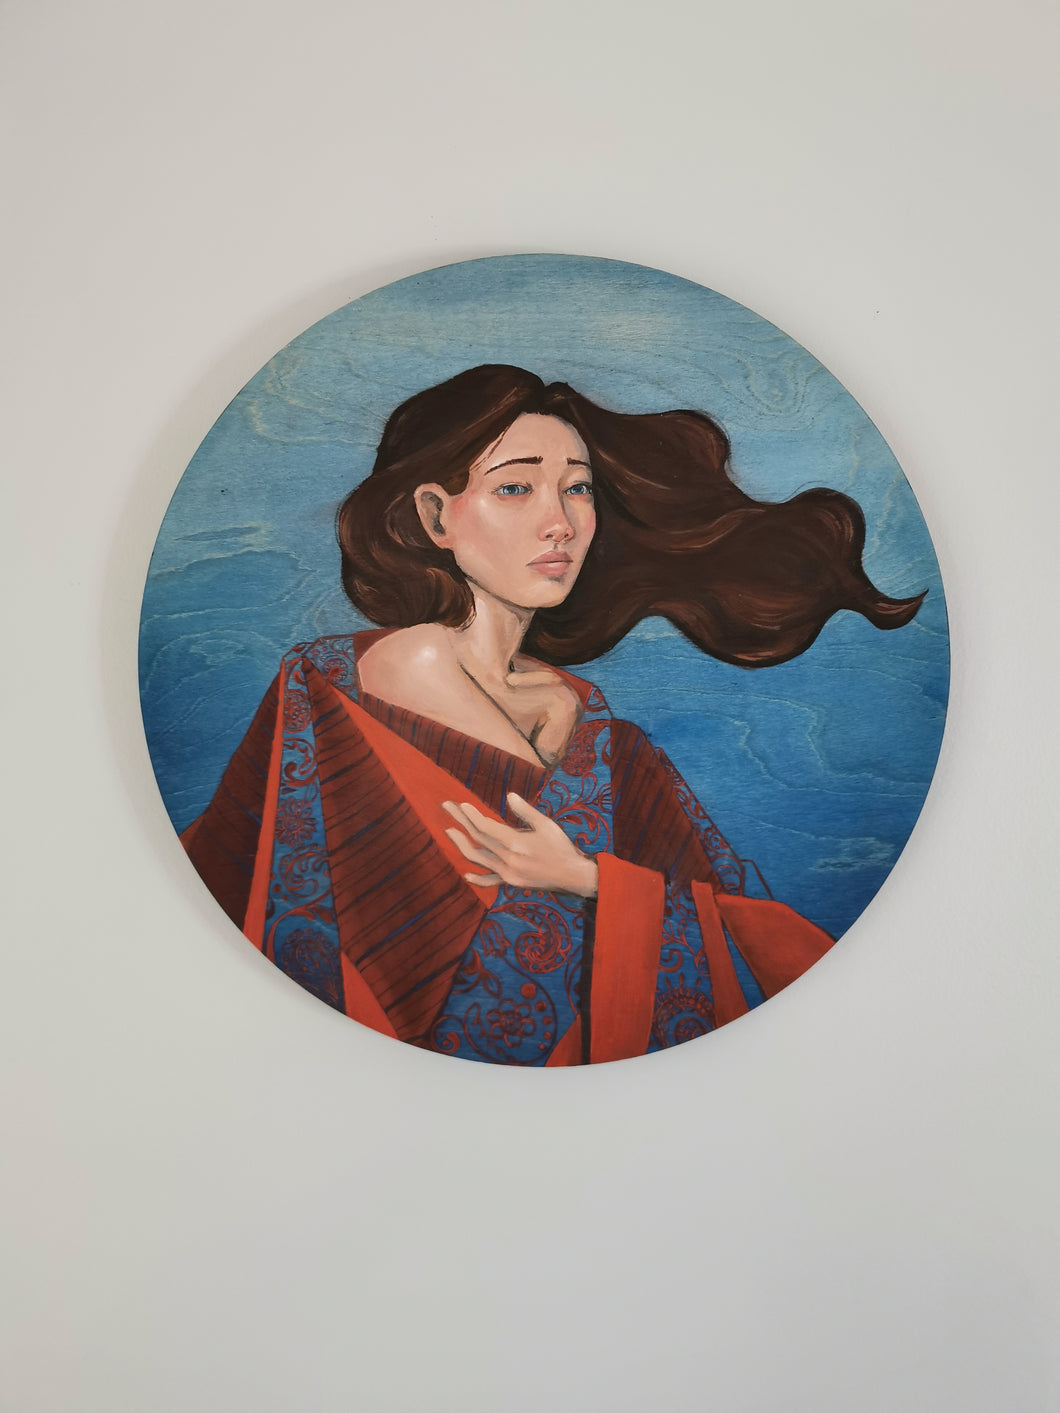 With the Breeze - Acrylic Portrait on Wood Panel - Original Painting